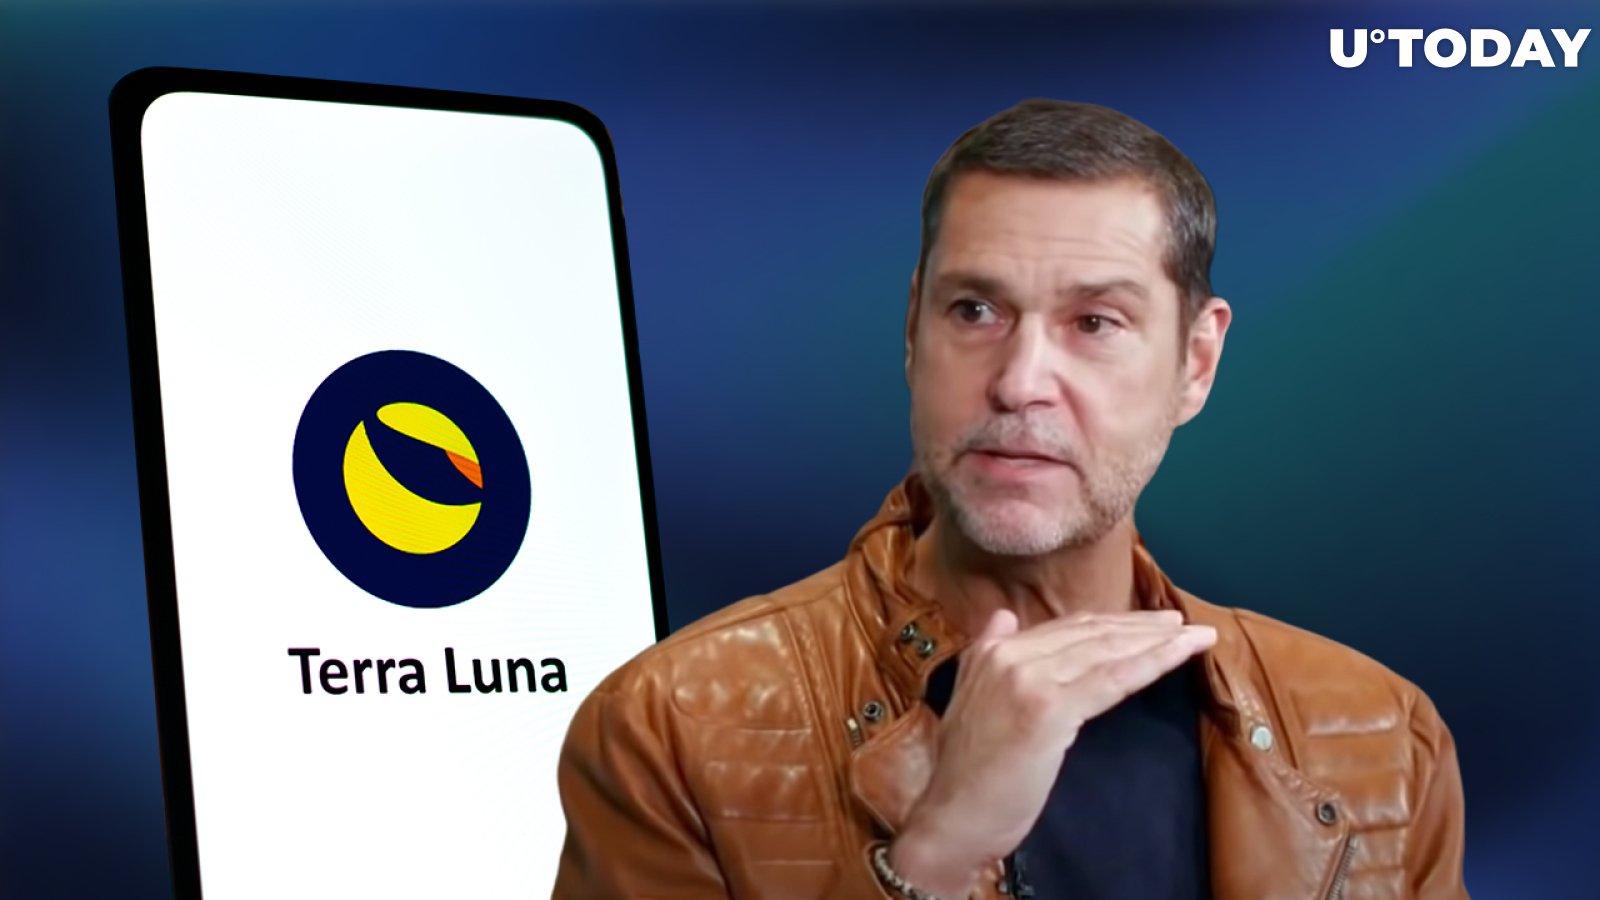 Raoul Pal Claims He Never Owned or Understood Terra (LUNA). Here's What He Said Six Months Ago